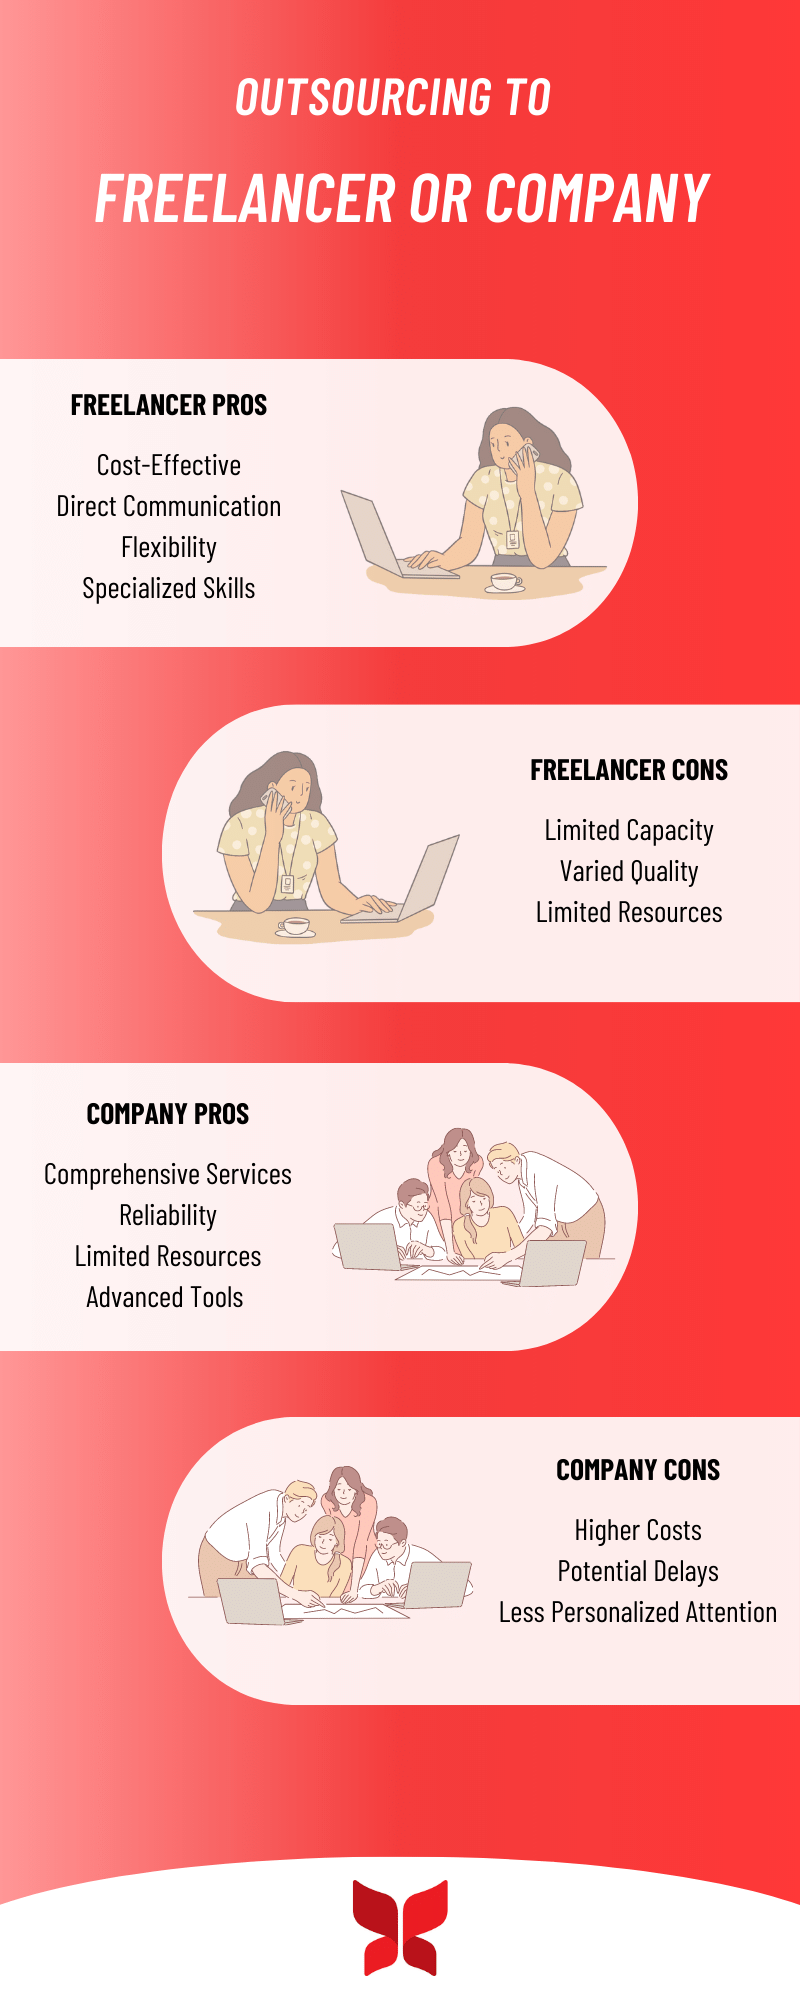 Outsource to a Freelancer or Company